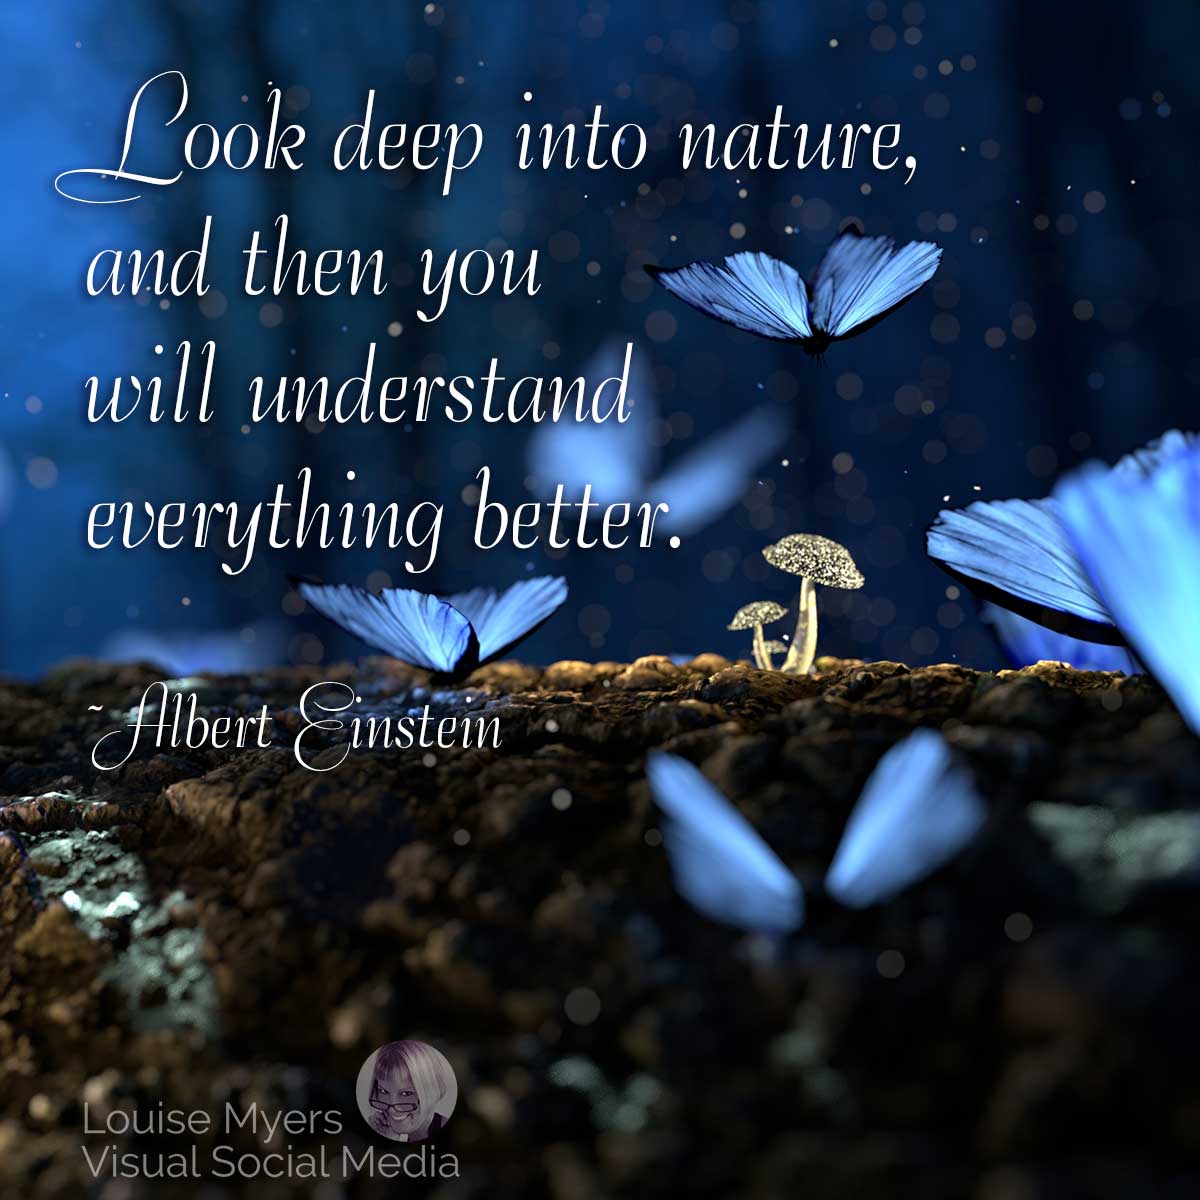 blue butterflies and mushroom with einstein quote look deep into nature.